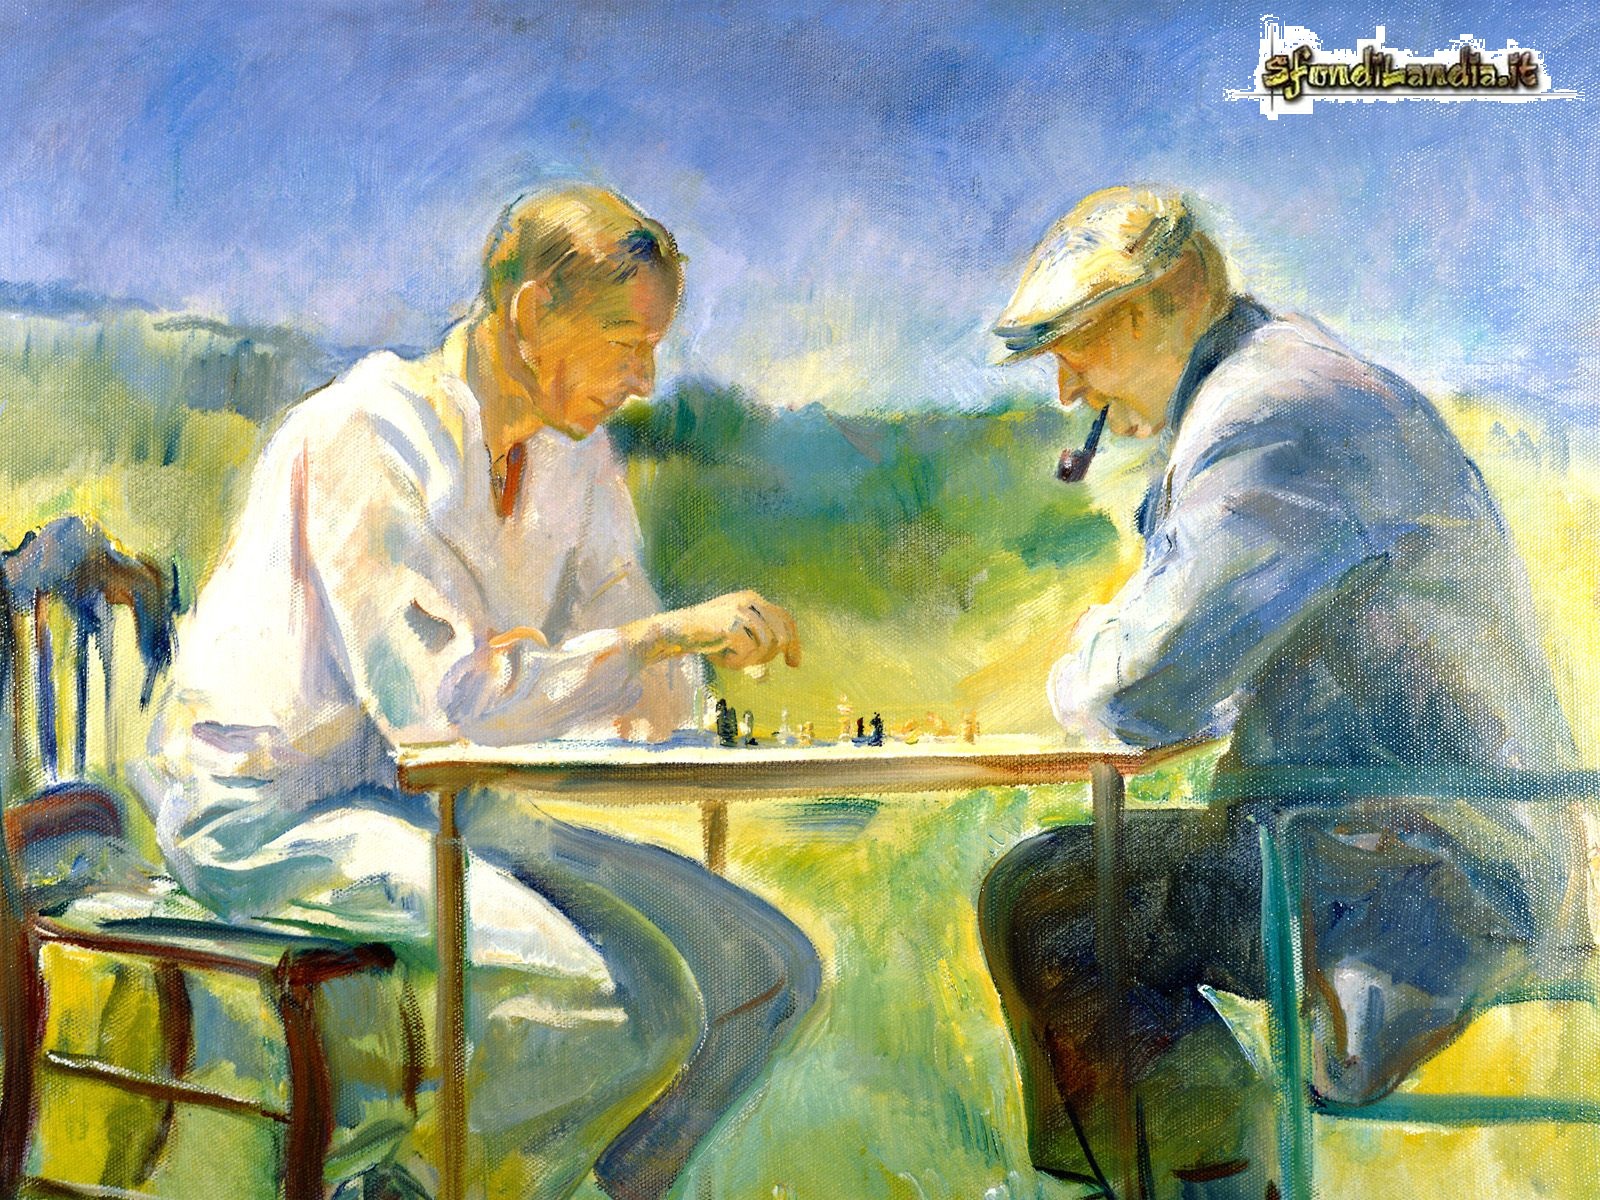 The Chess Game